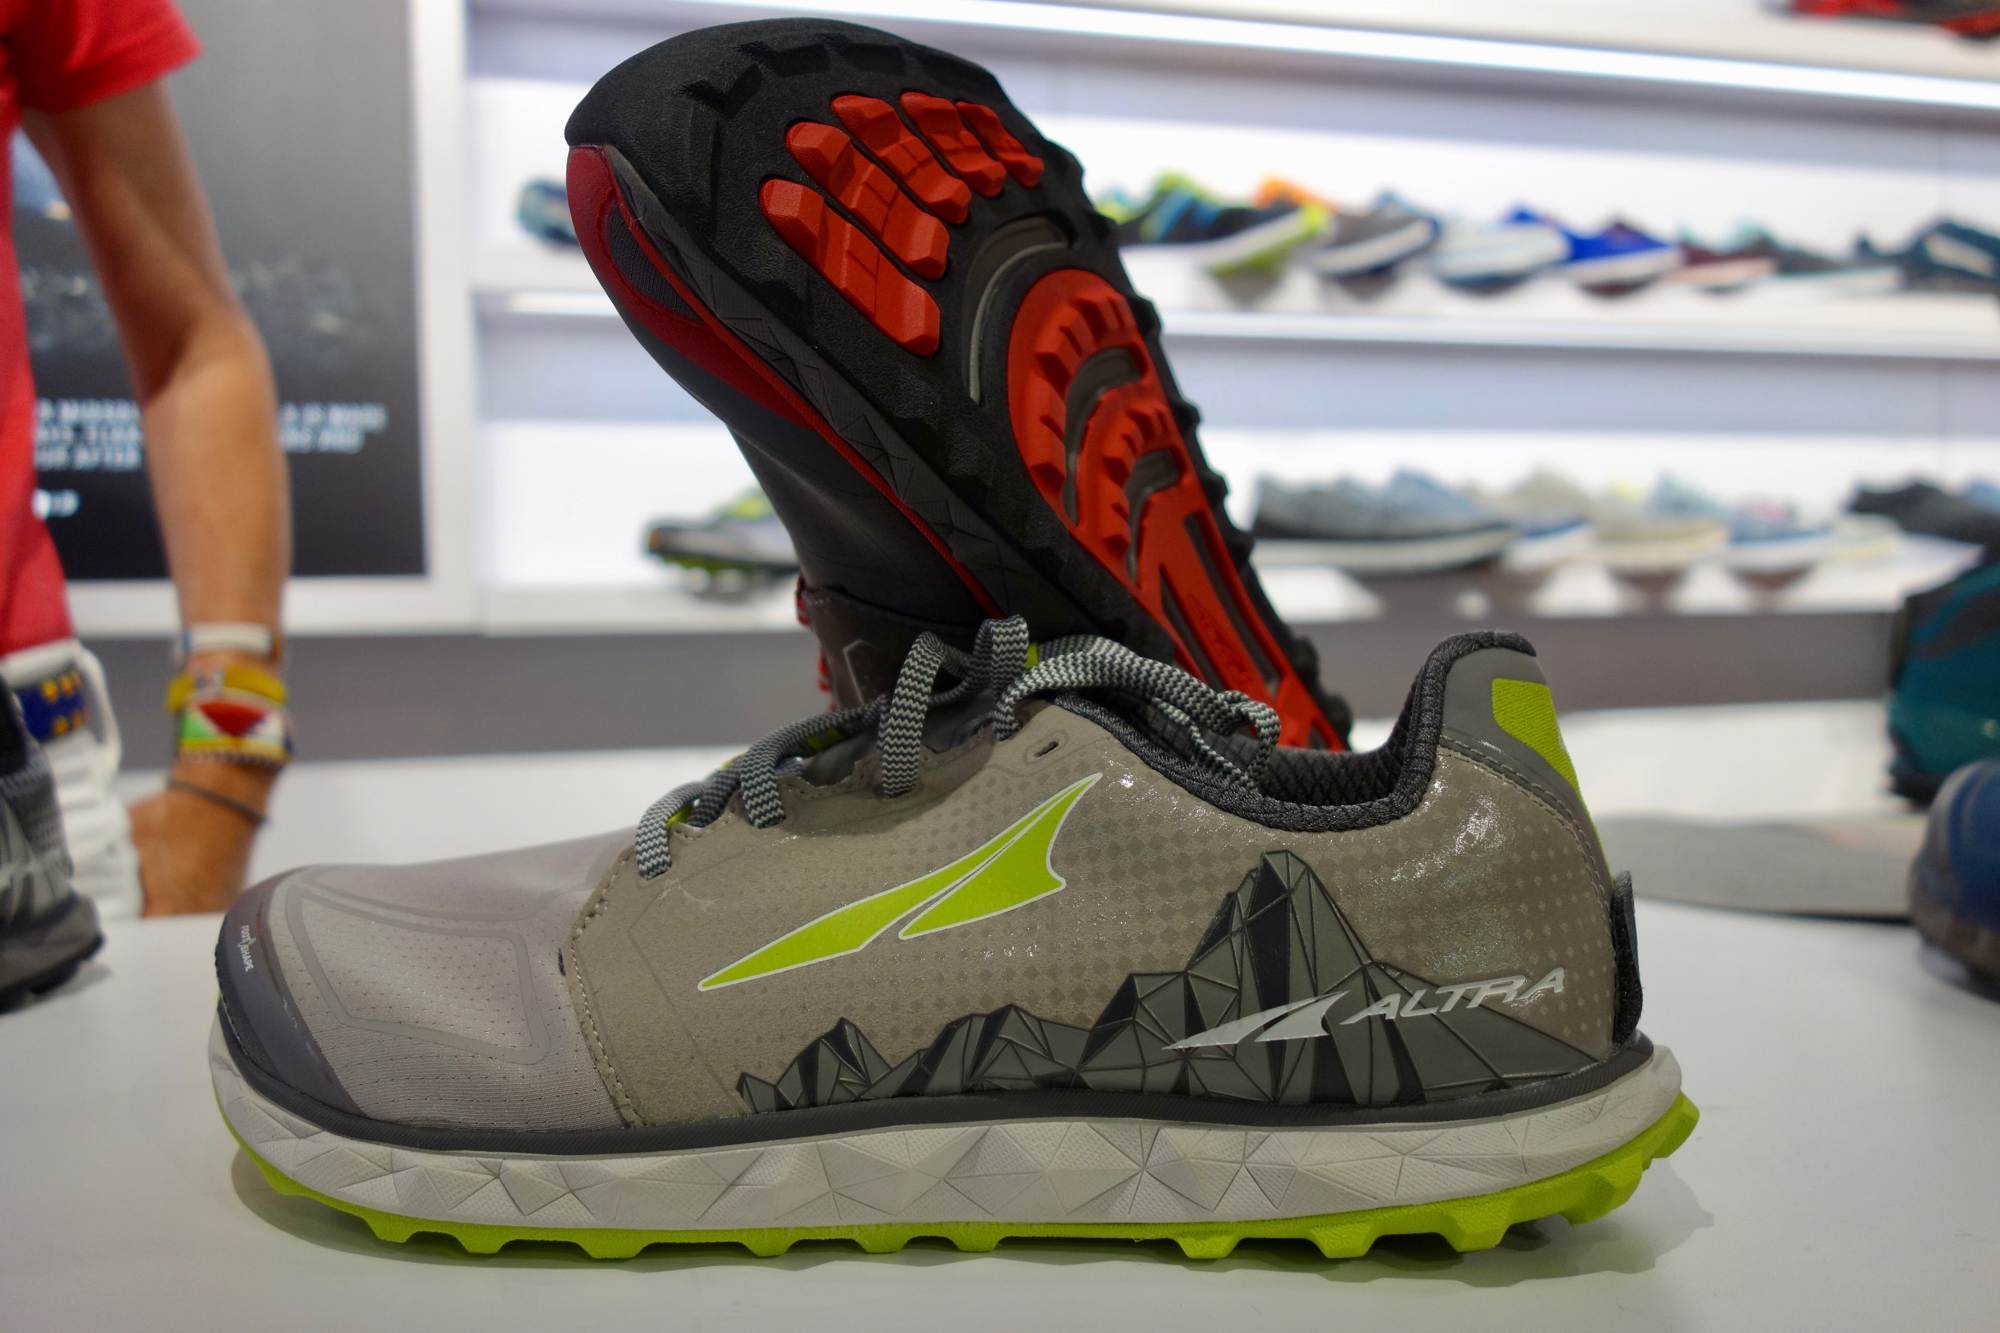 2019 trail running shoes